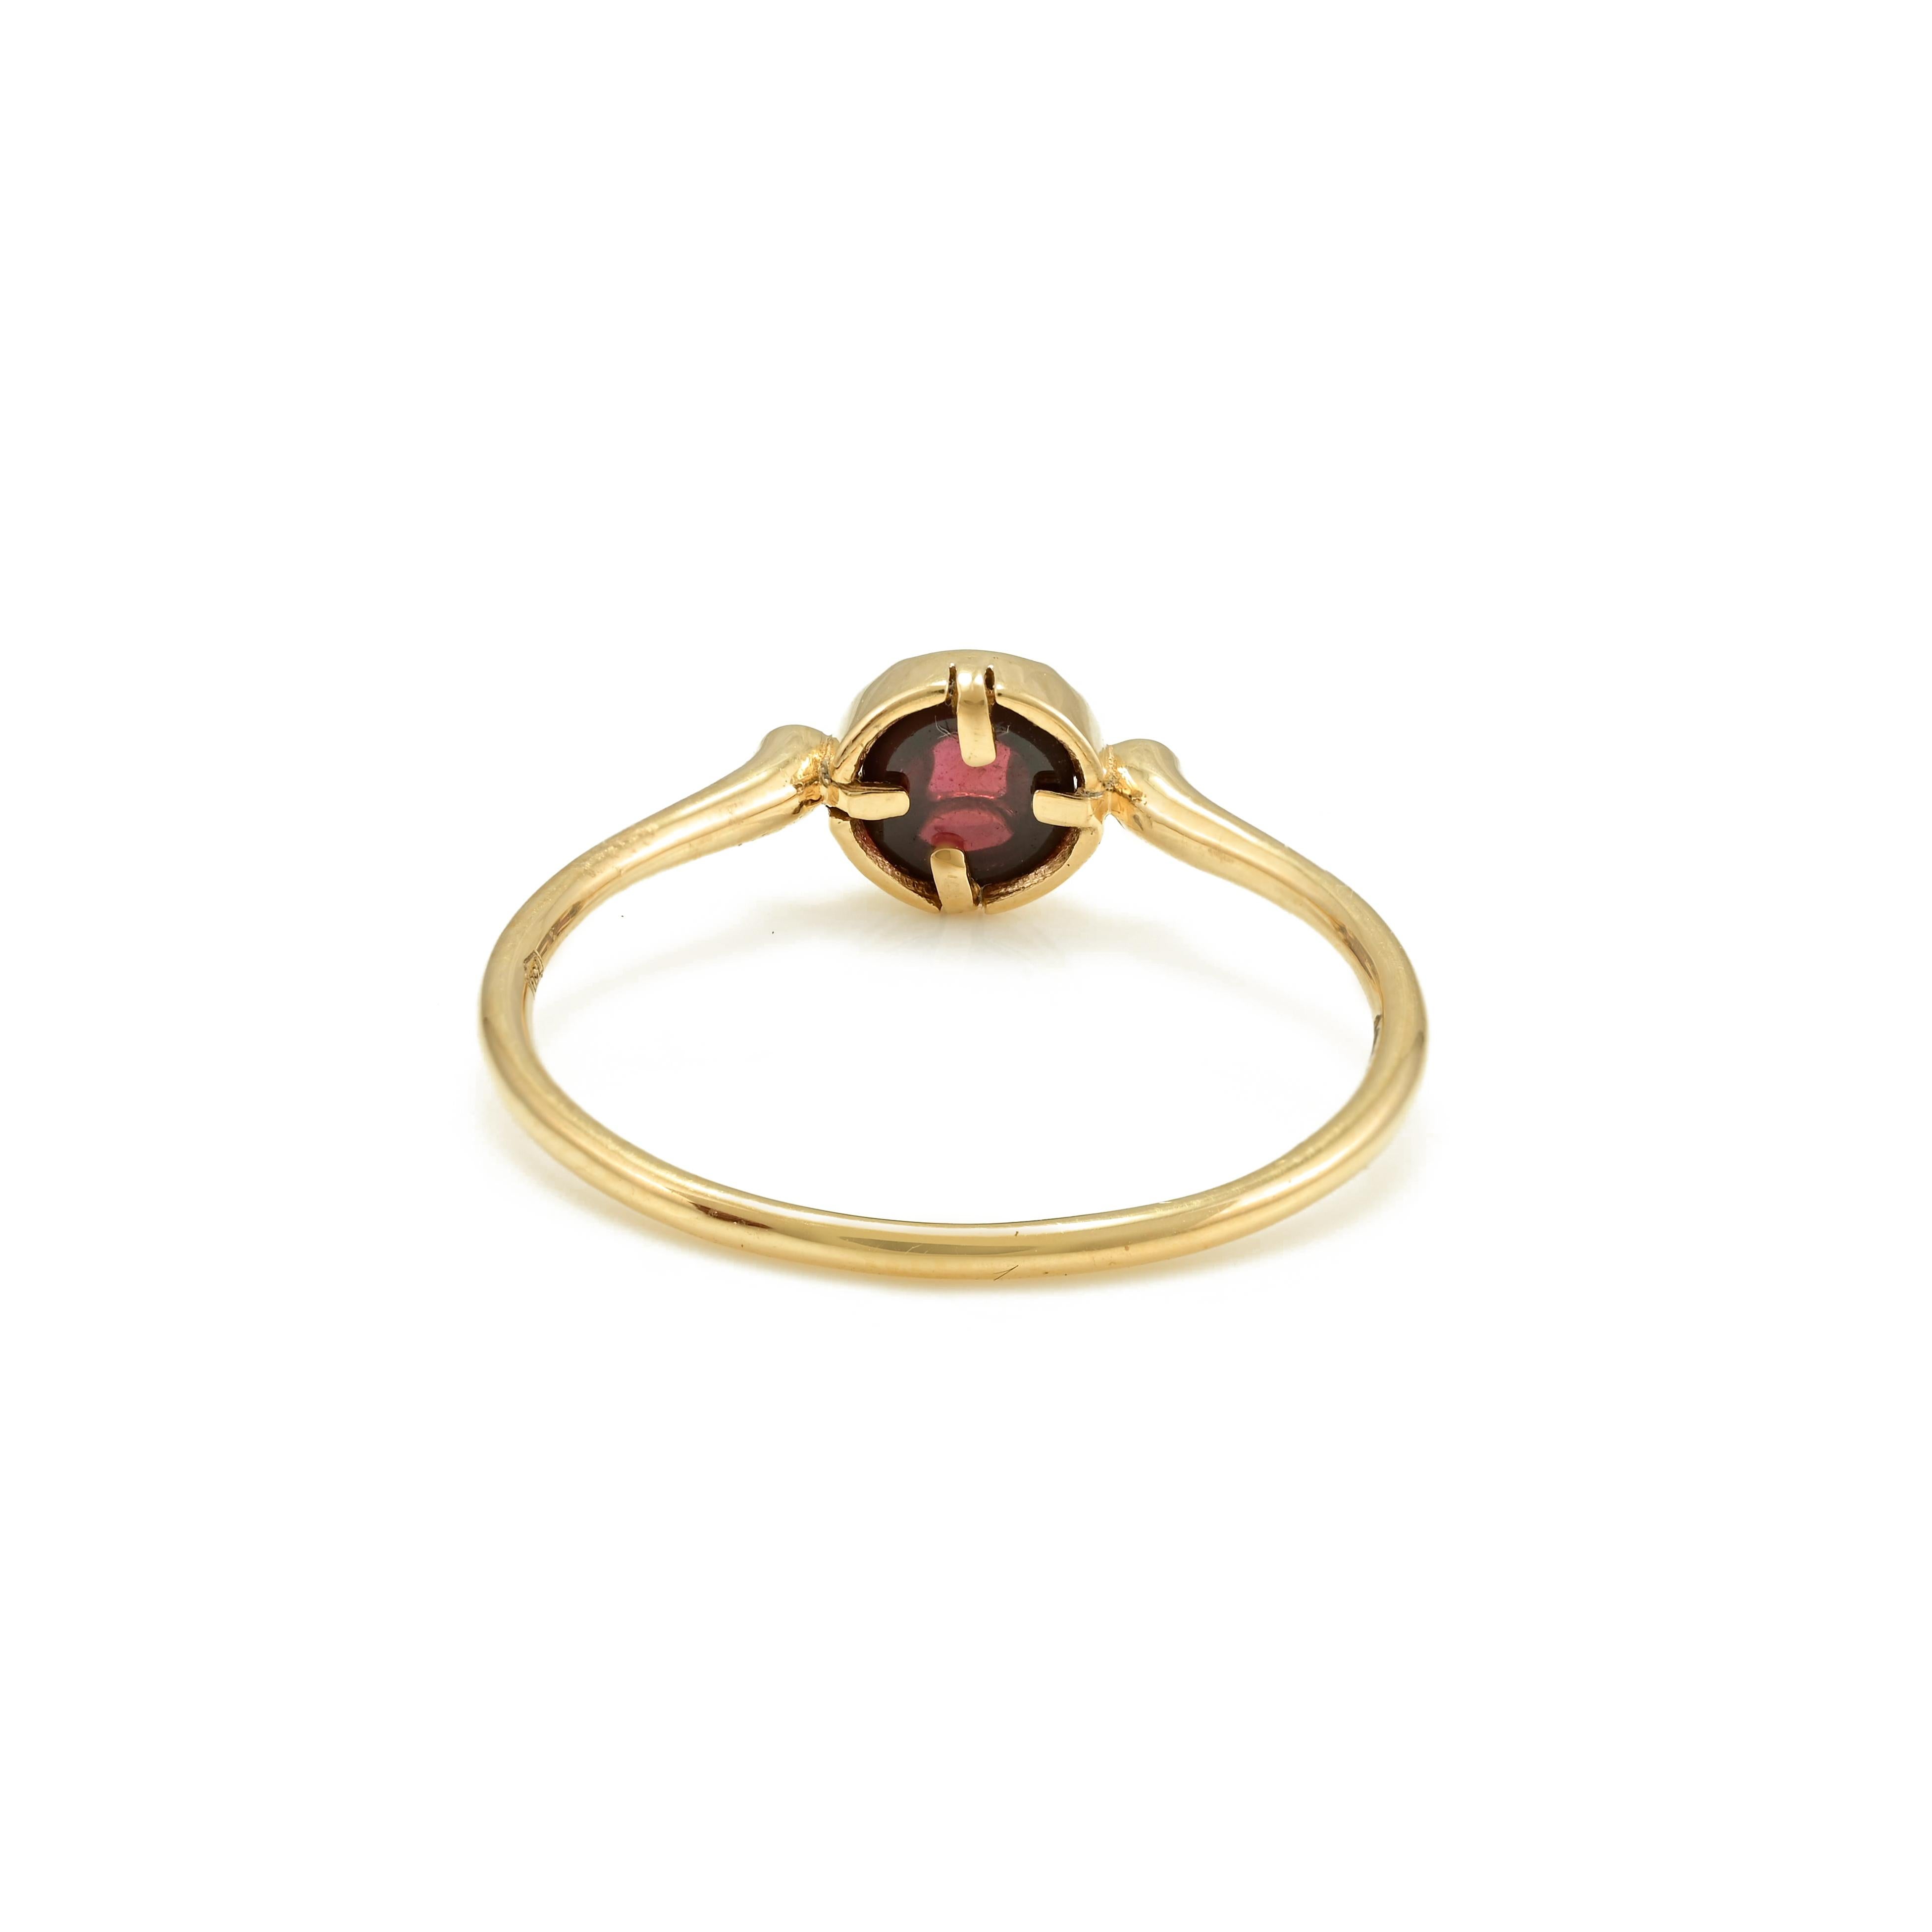 For Sale:  Everyday Minimalist Garnet Ring in 18k Solid Yellow Gold For Her 5